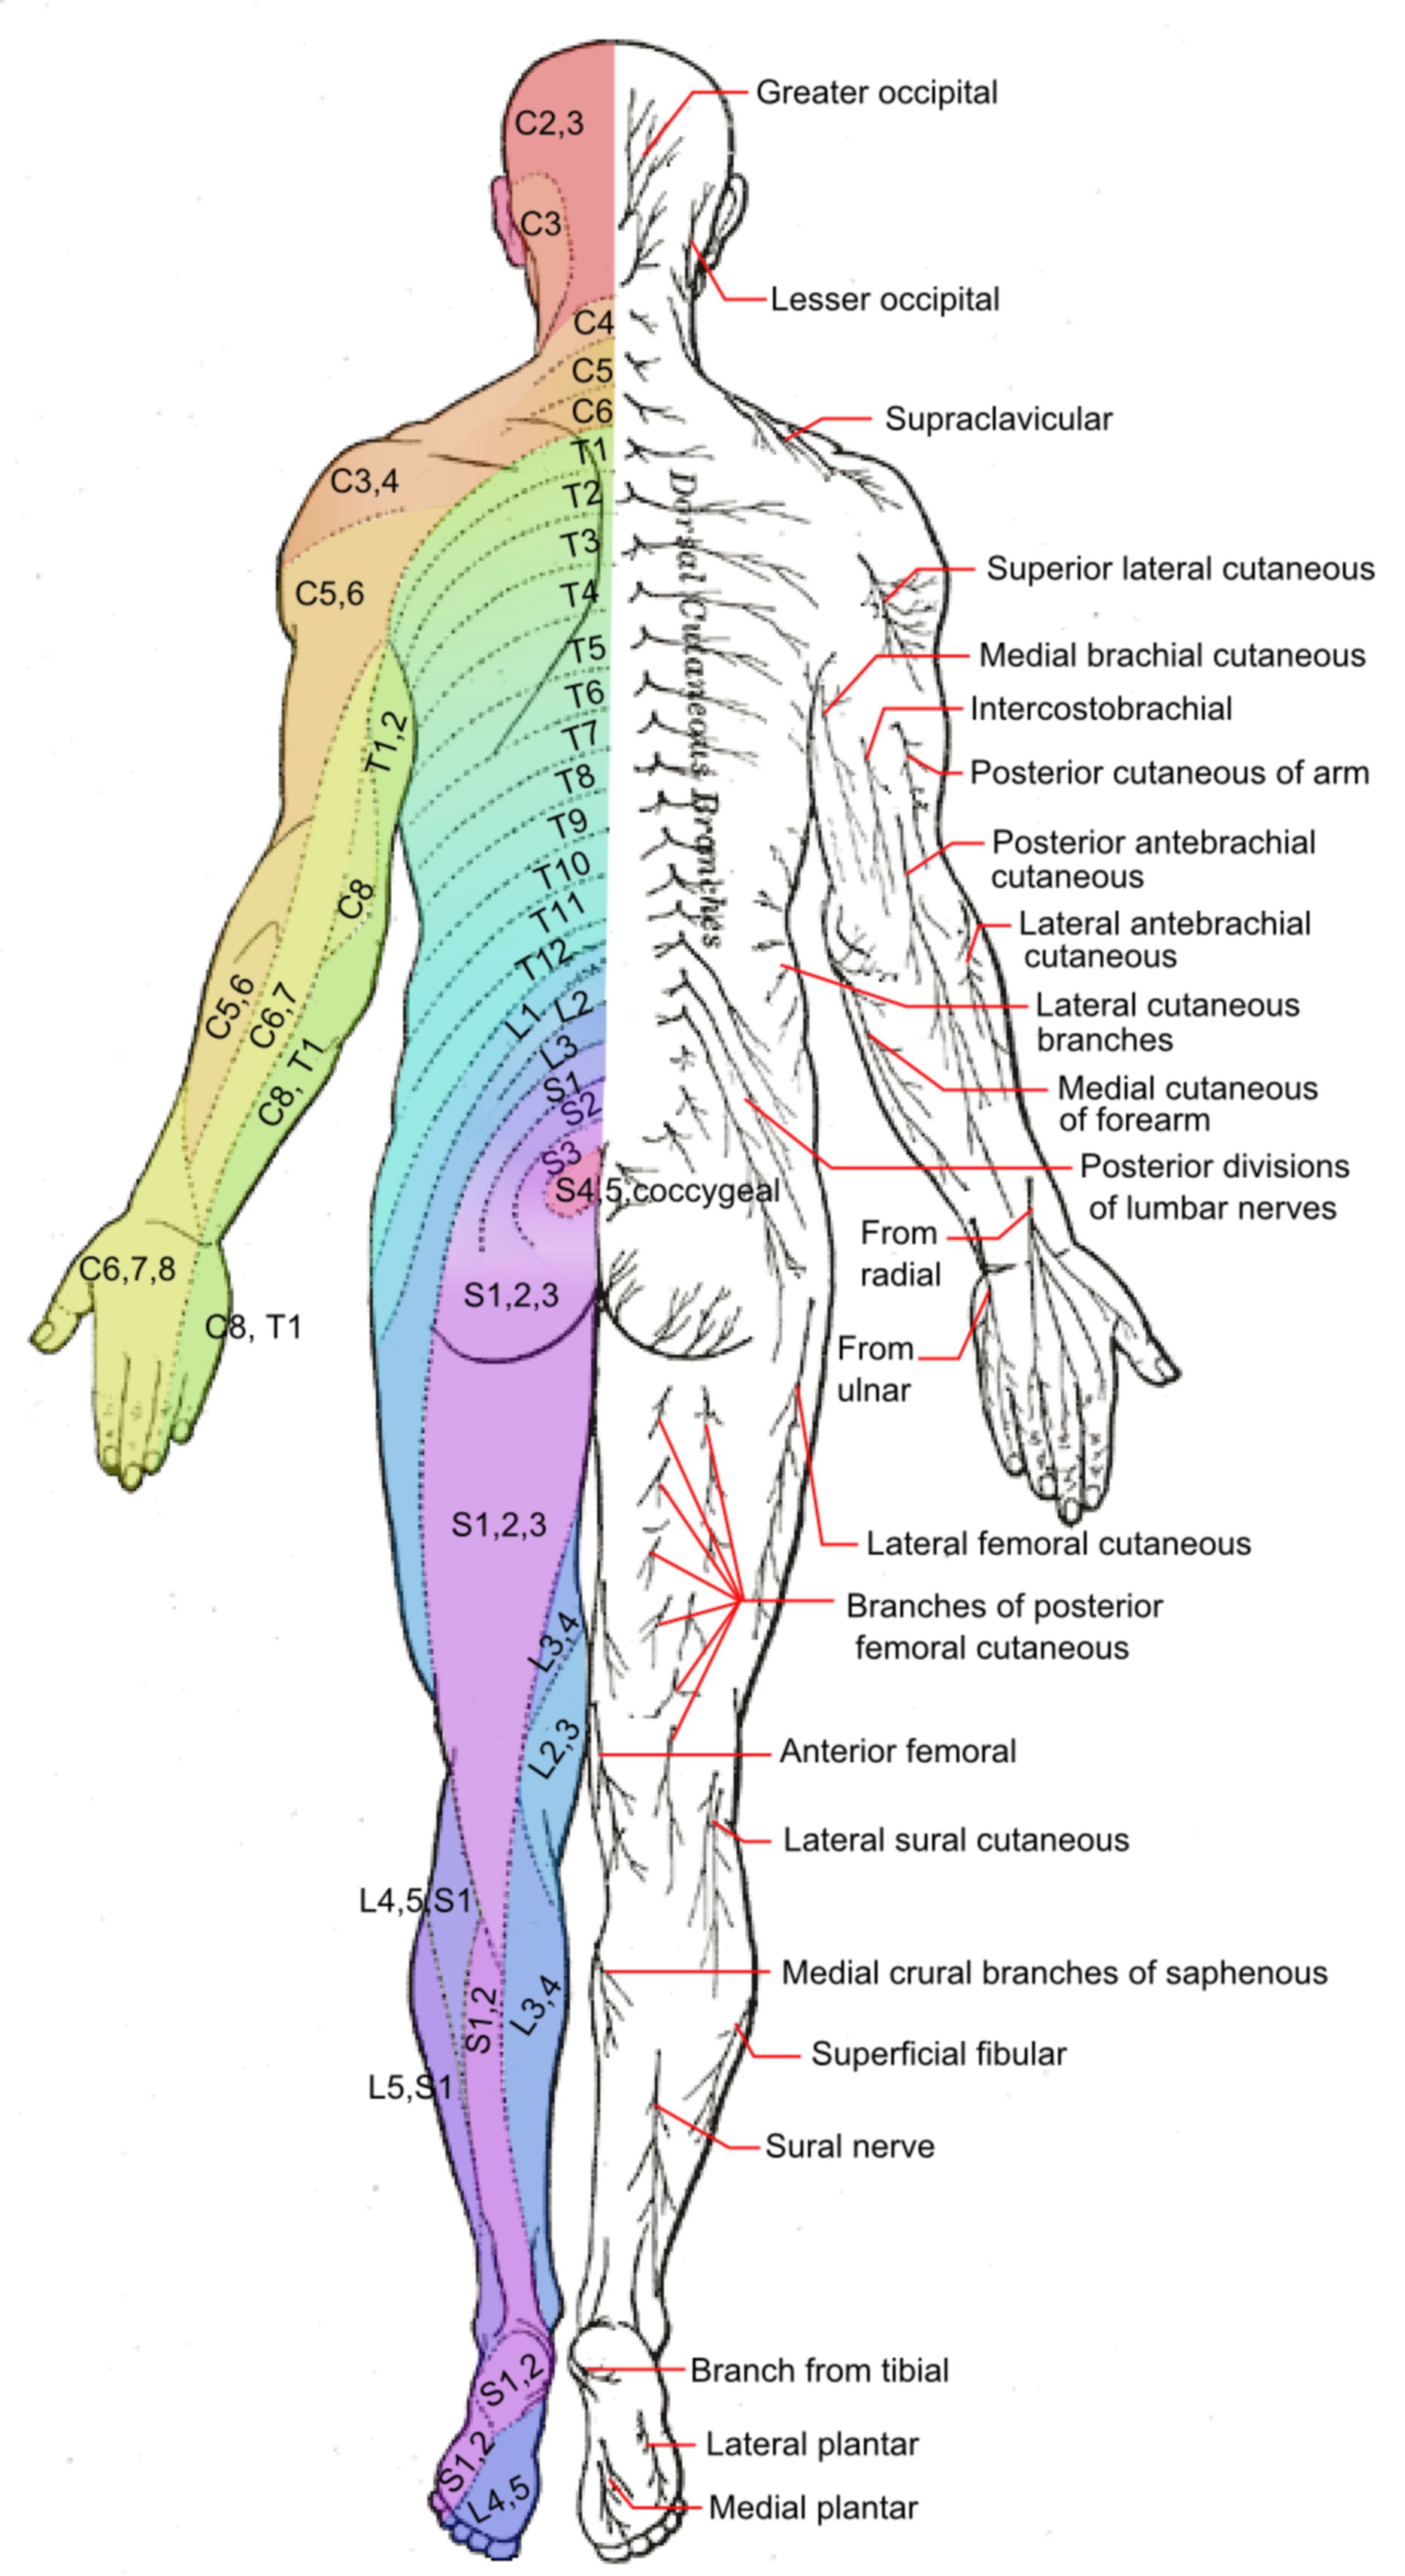 Dermatomes_and_cutaneous_nerves_-_posterior